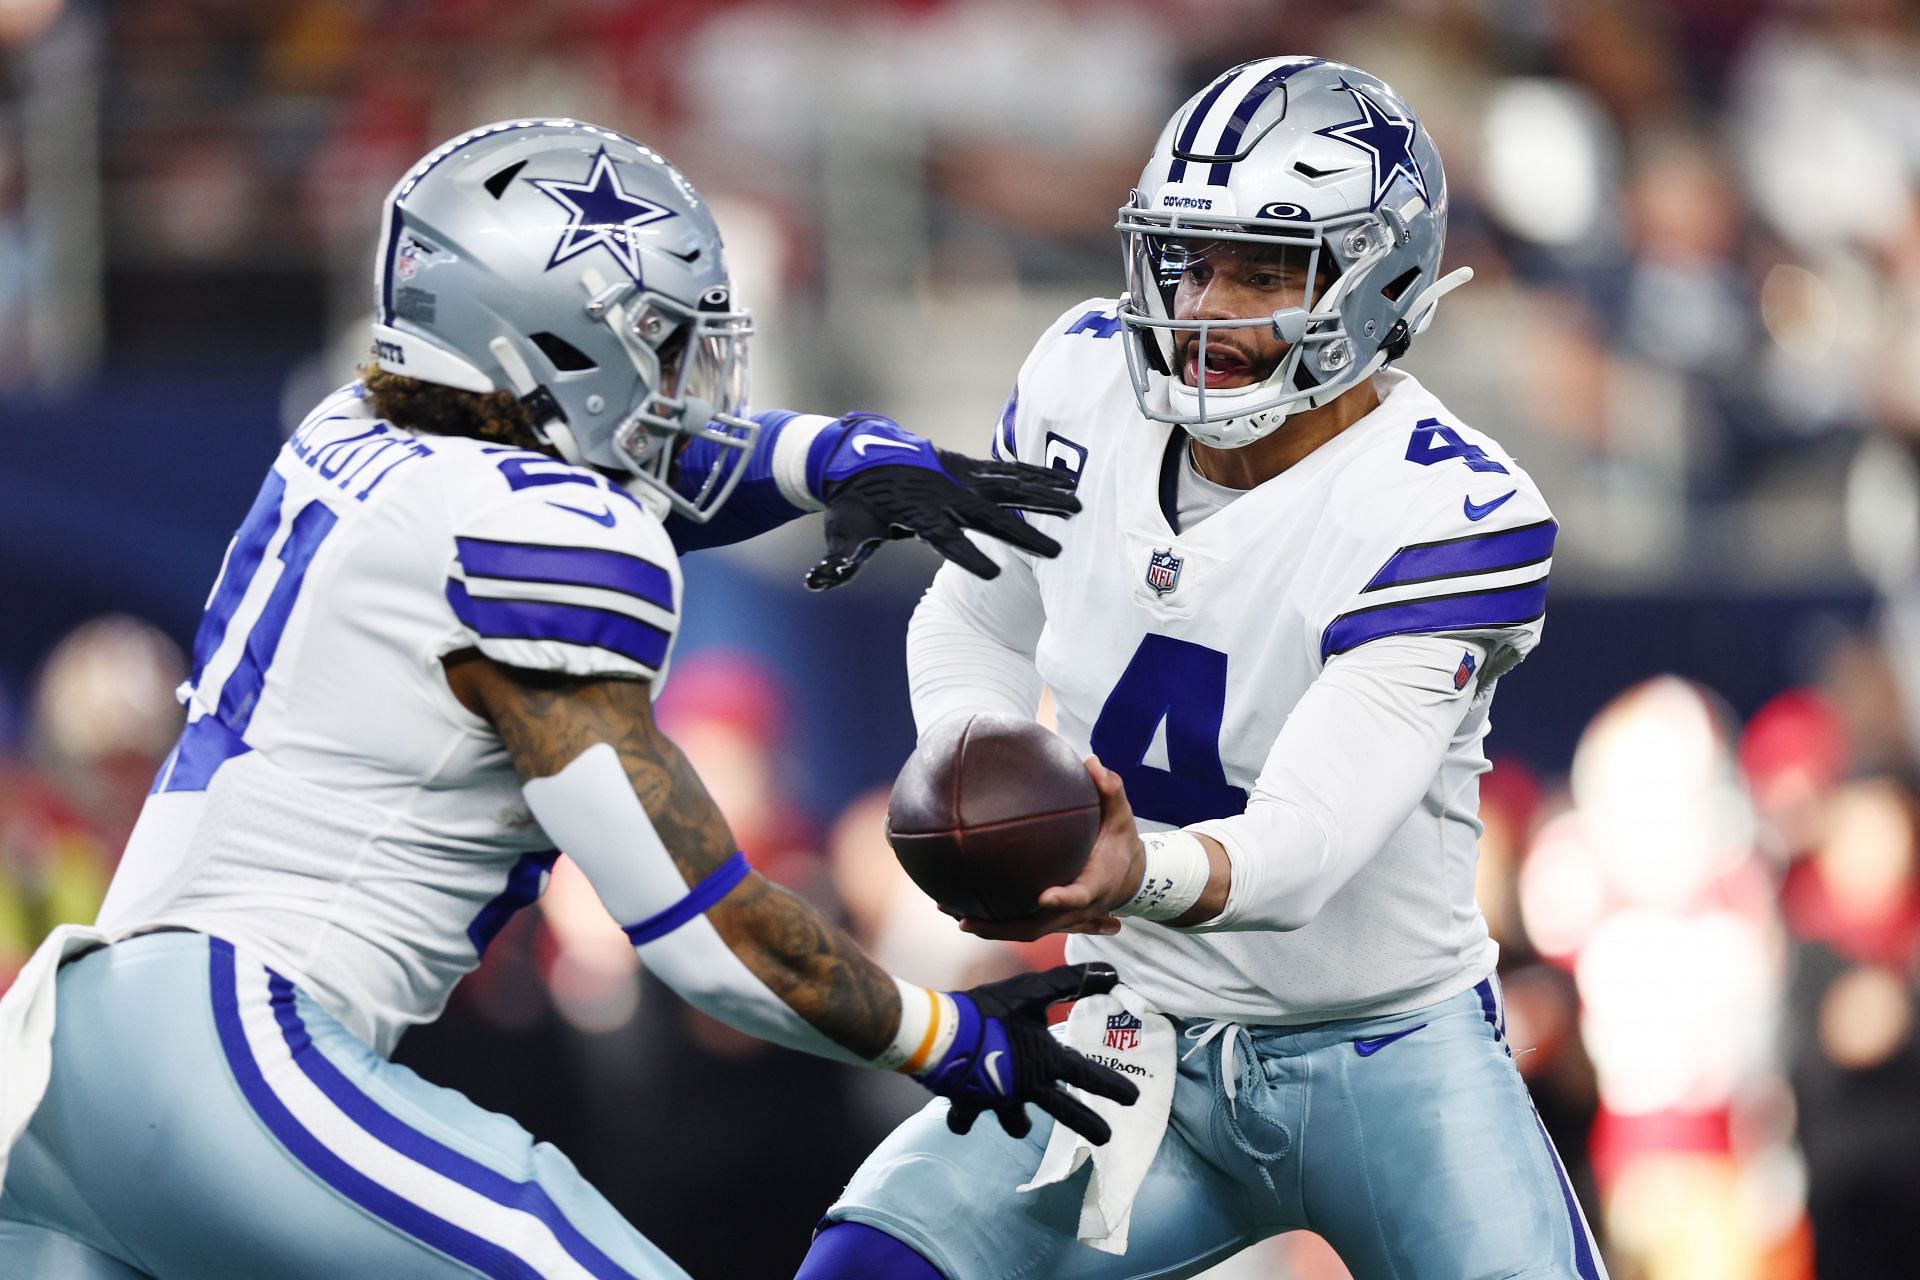 Prescott and Elliott both struggled in the loss to the 49ers